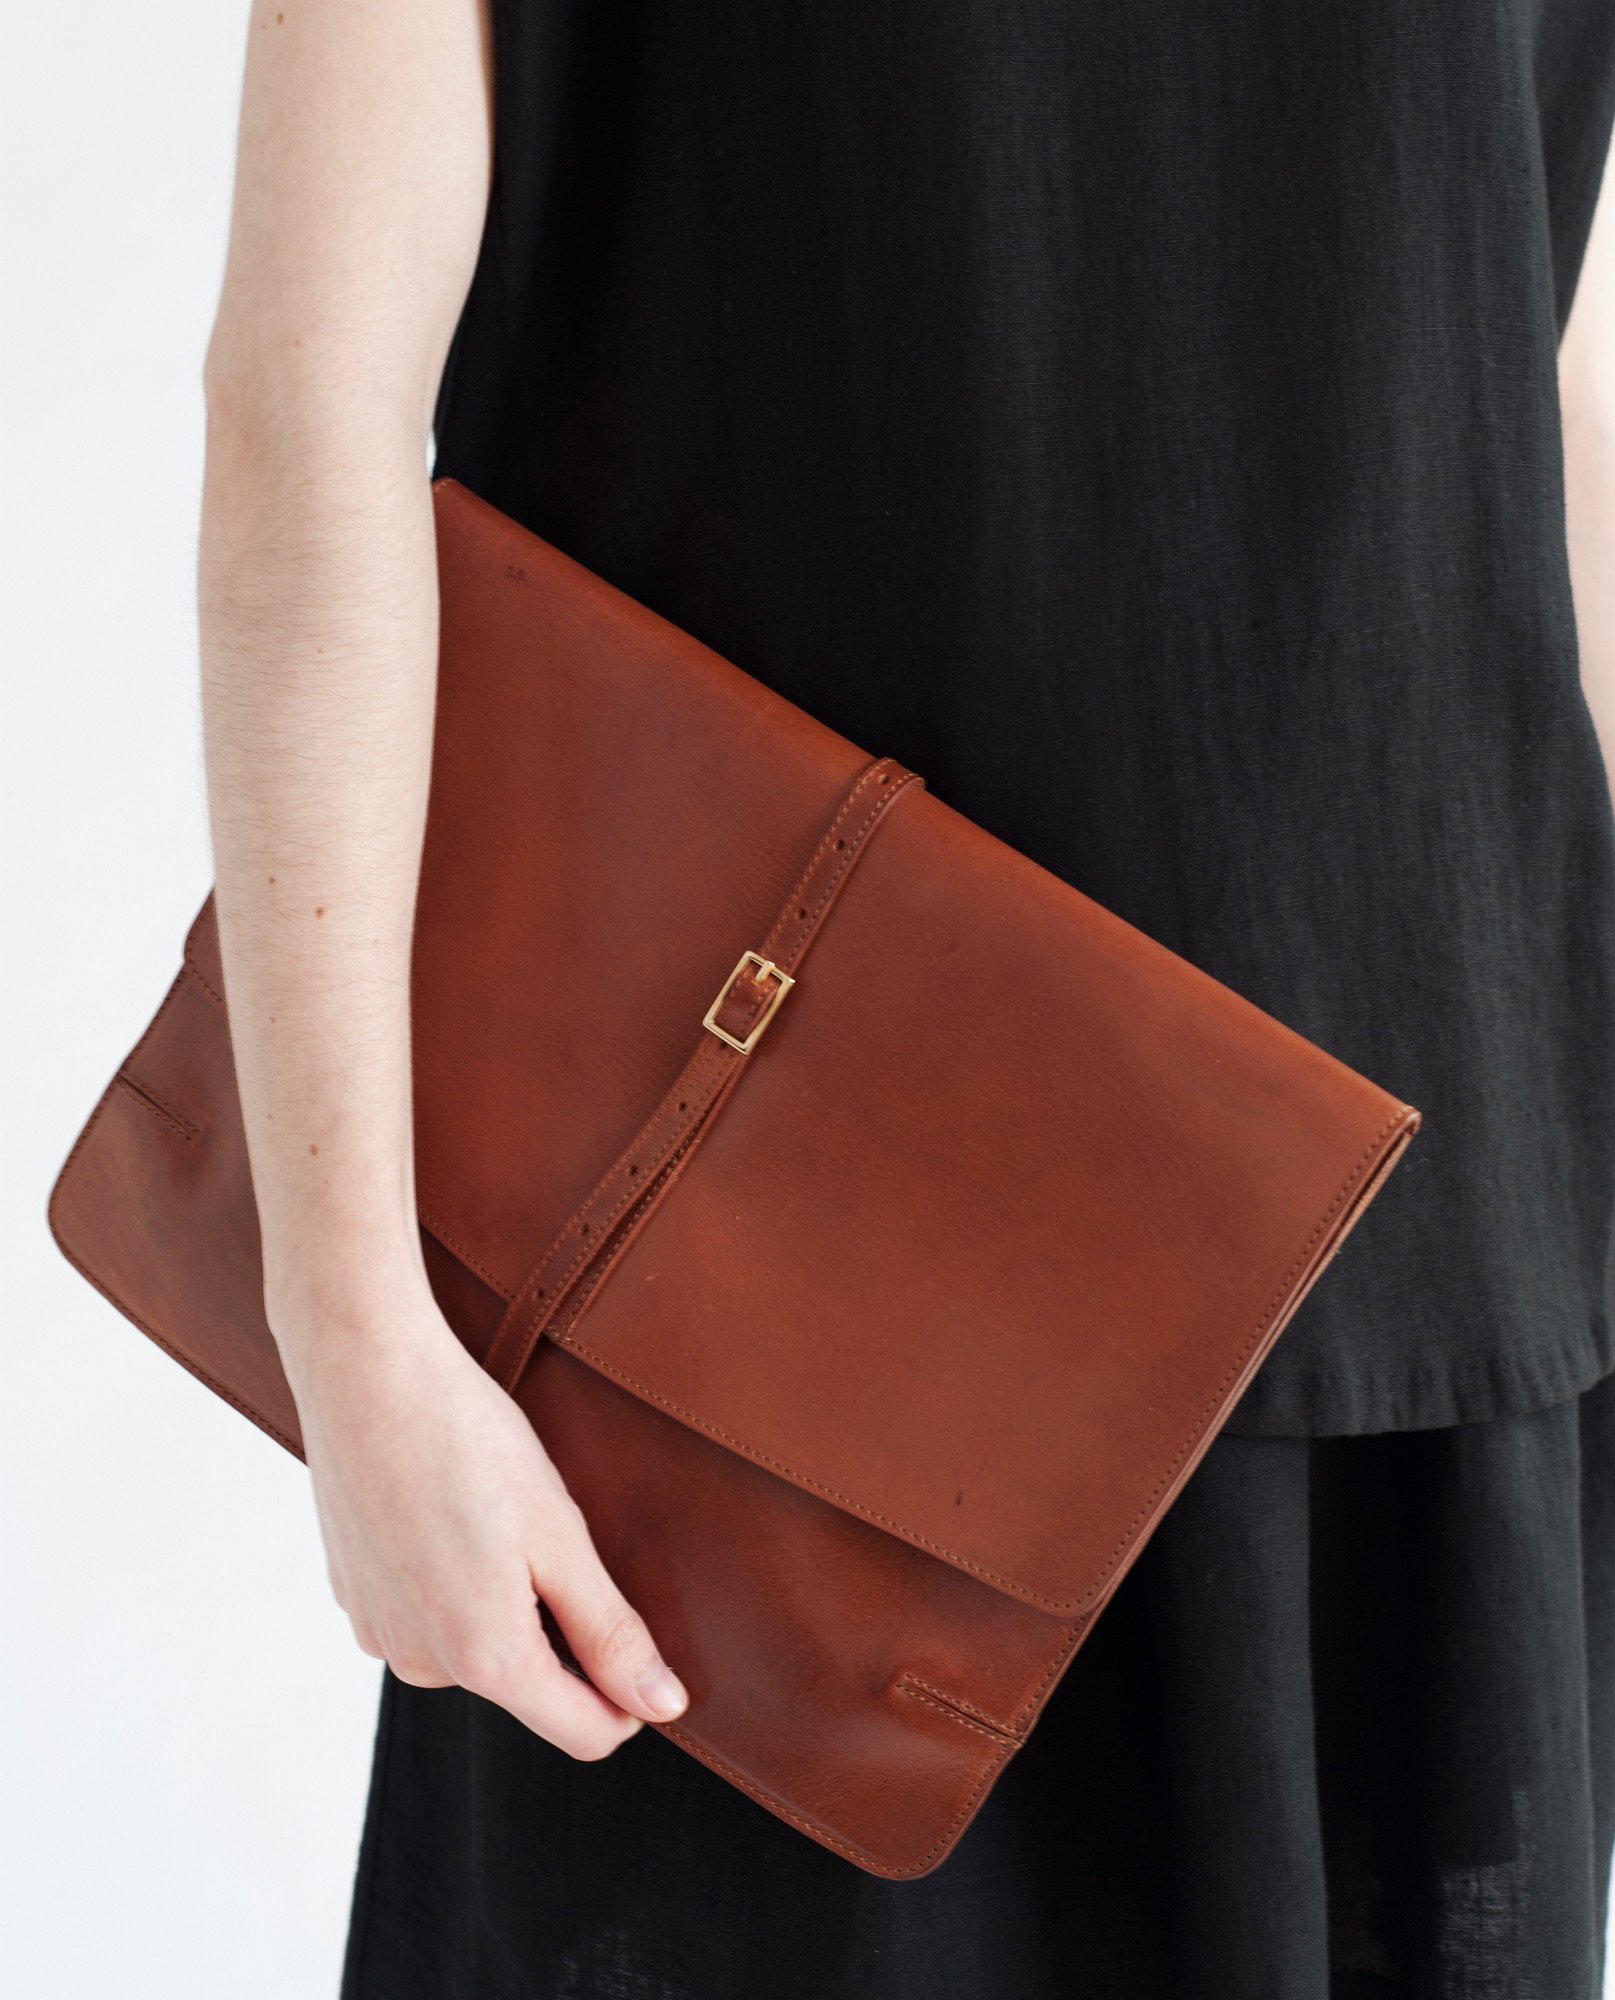 Florence-Beaumont-Organic-Leather-Clutch-Bag-1.jpg